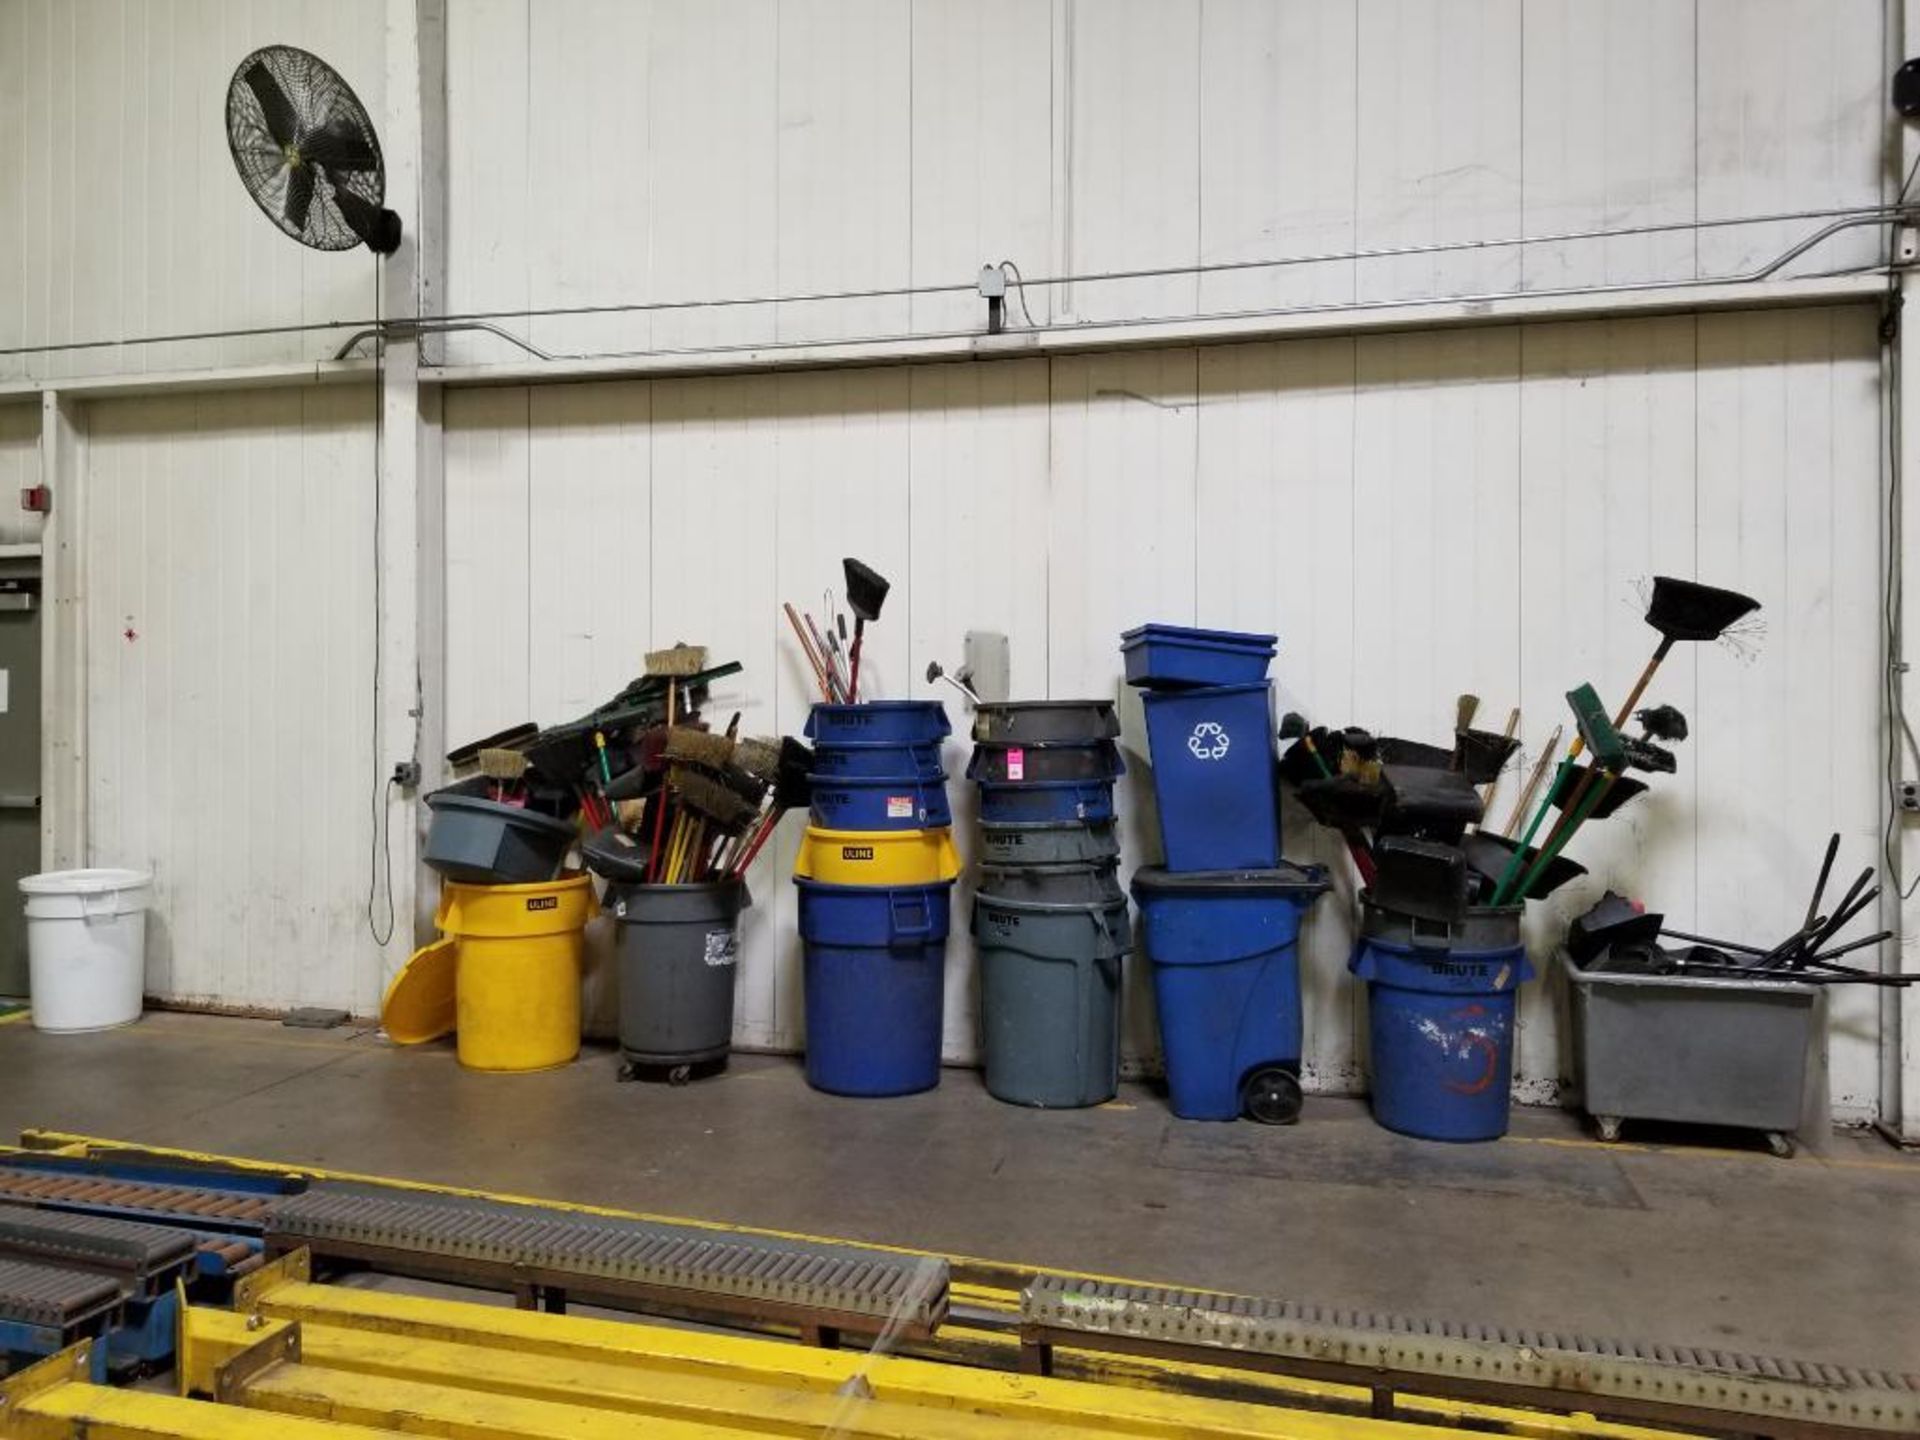 Large qty of trash cans and brooms.